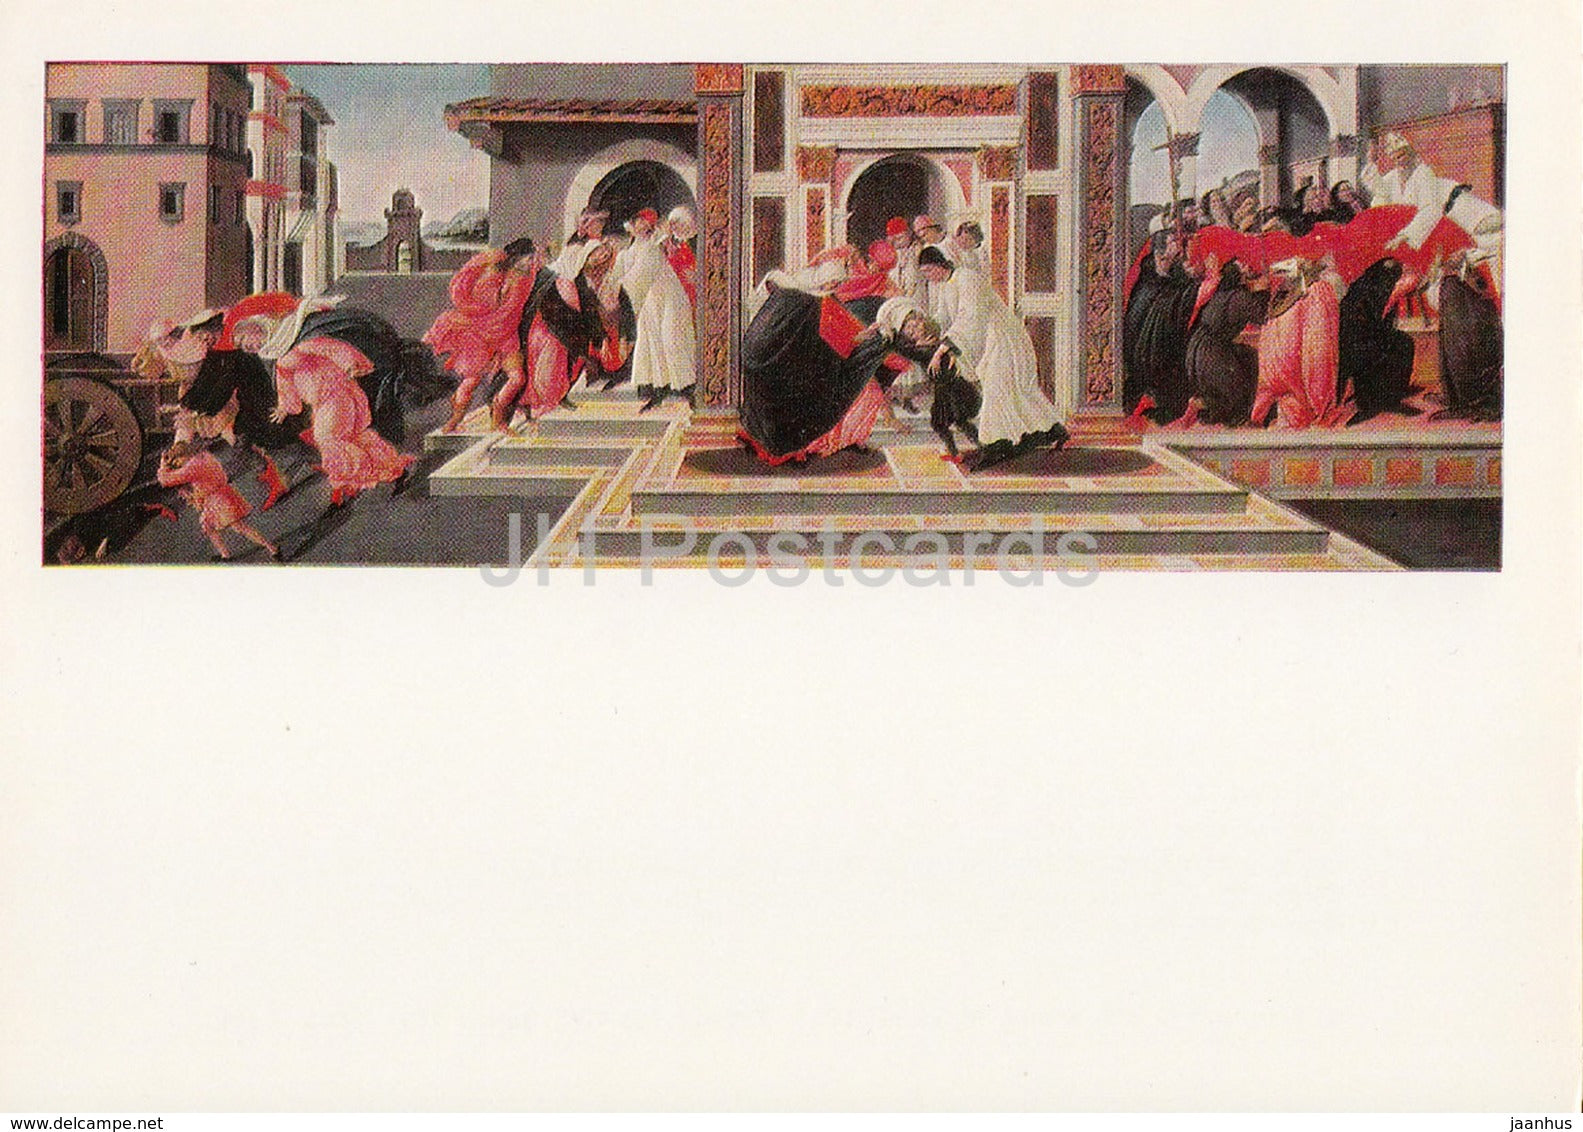 painting by Sandro Botticelli - Four scenes from the life of St. Zinovia - italian art - 1985 - Russia USSR - unused - JH Postcards